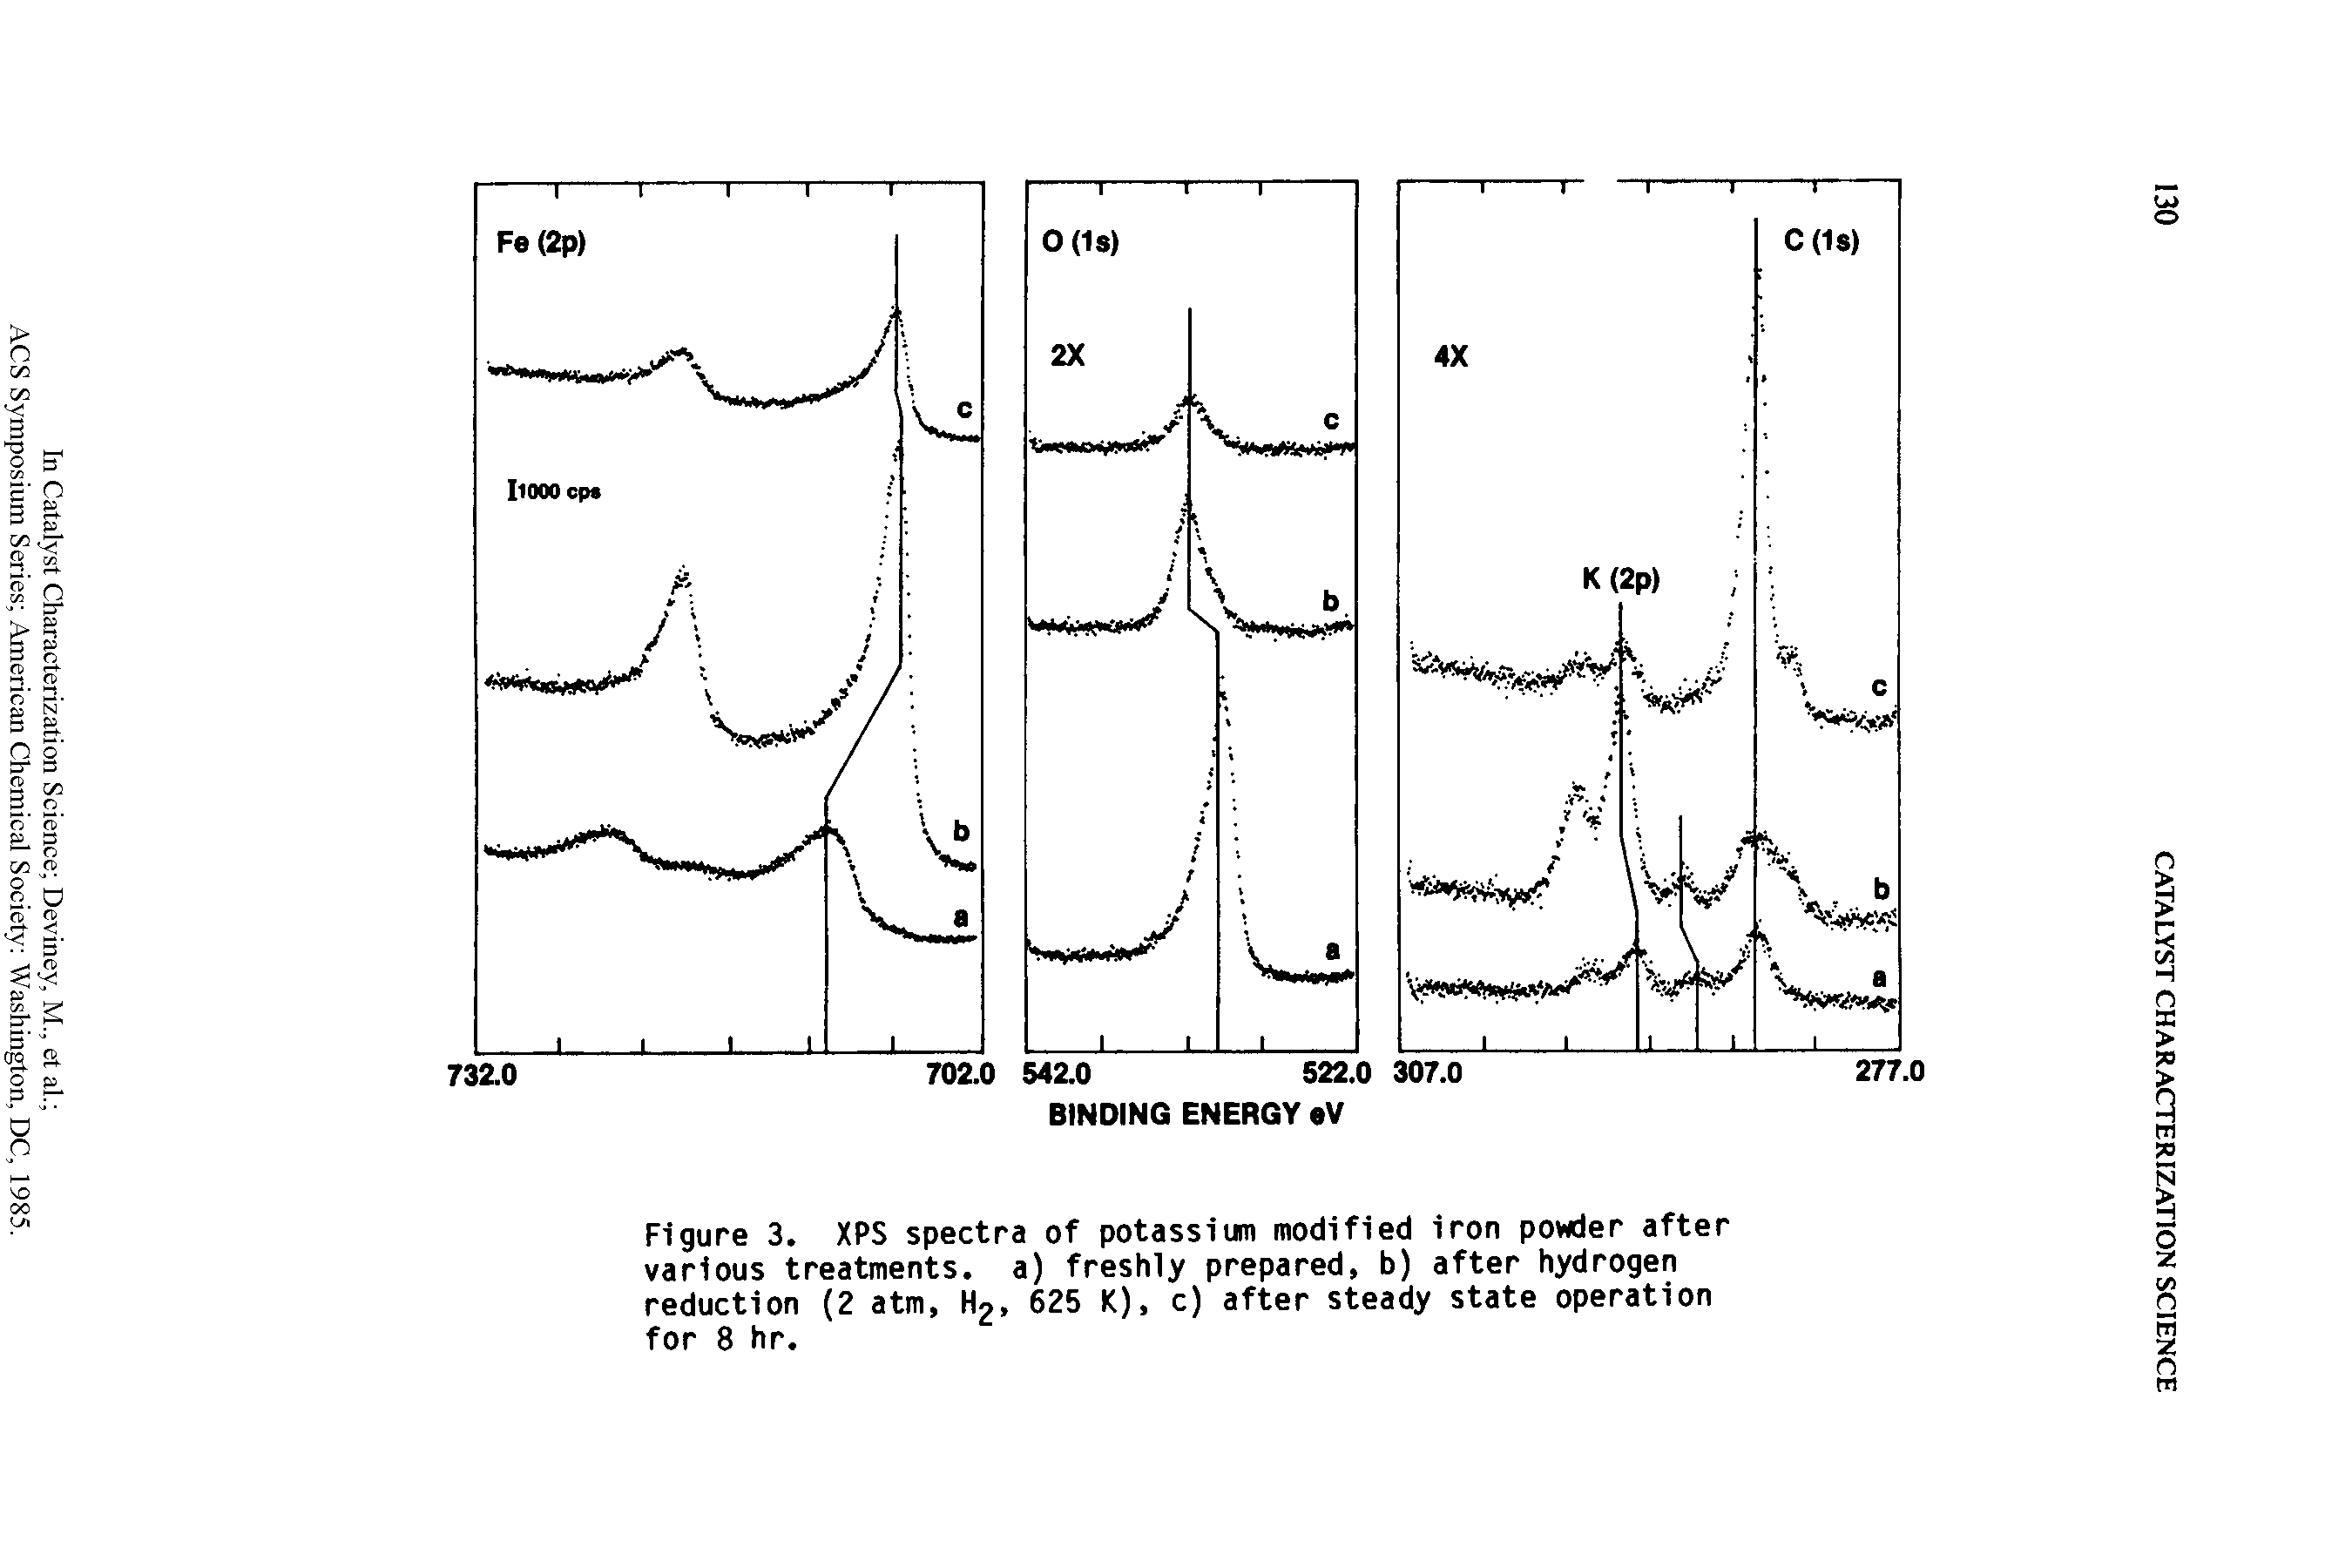 Figure 3. XPS spectra of potassium modified iron powder after various treatments, a) freshly prepared, b) after hydrogen reduction (2 atm, H2, 625 K), c) after steady state operation for 8 hr.